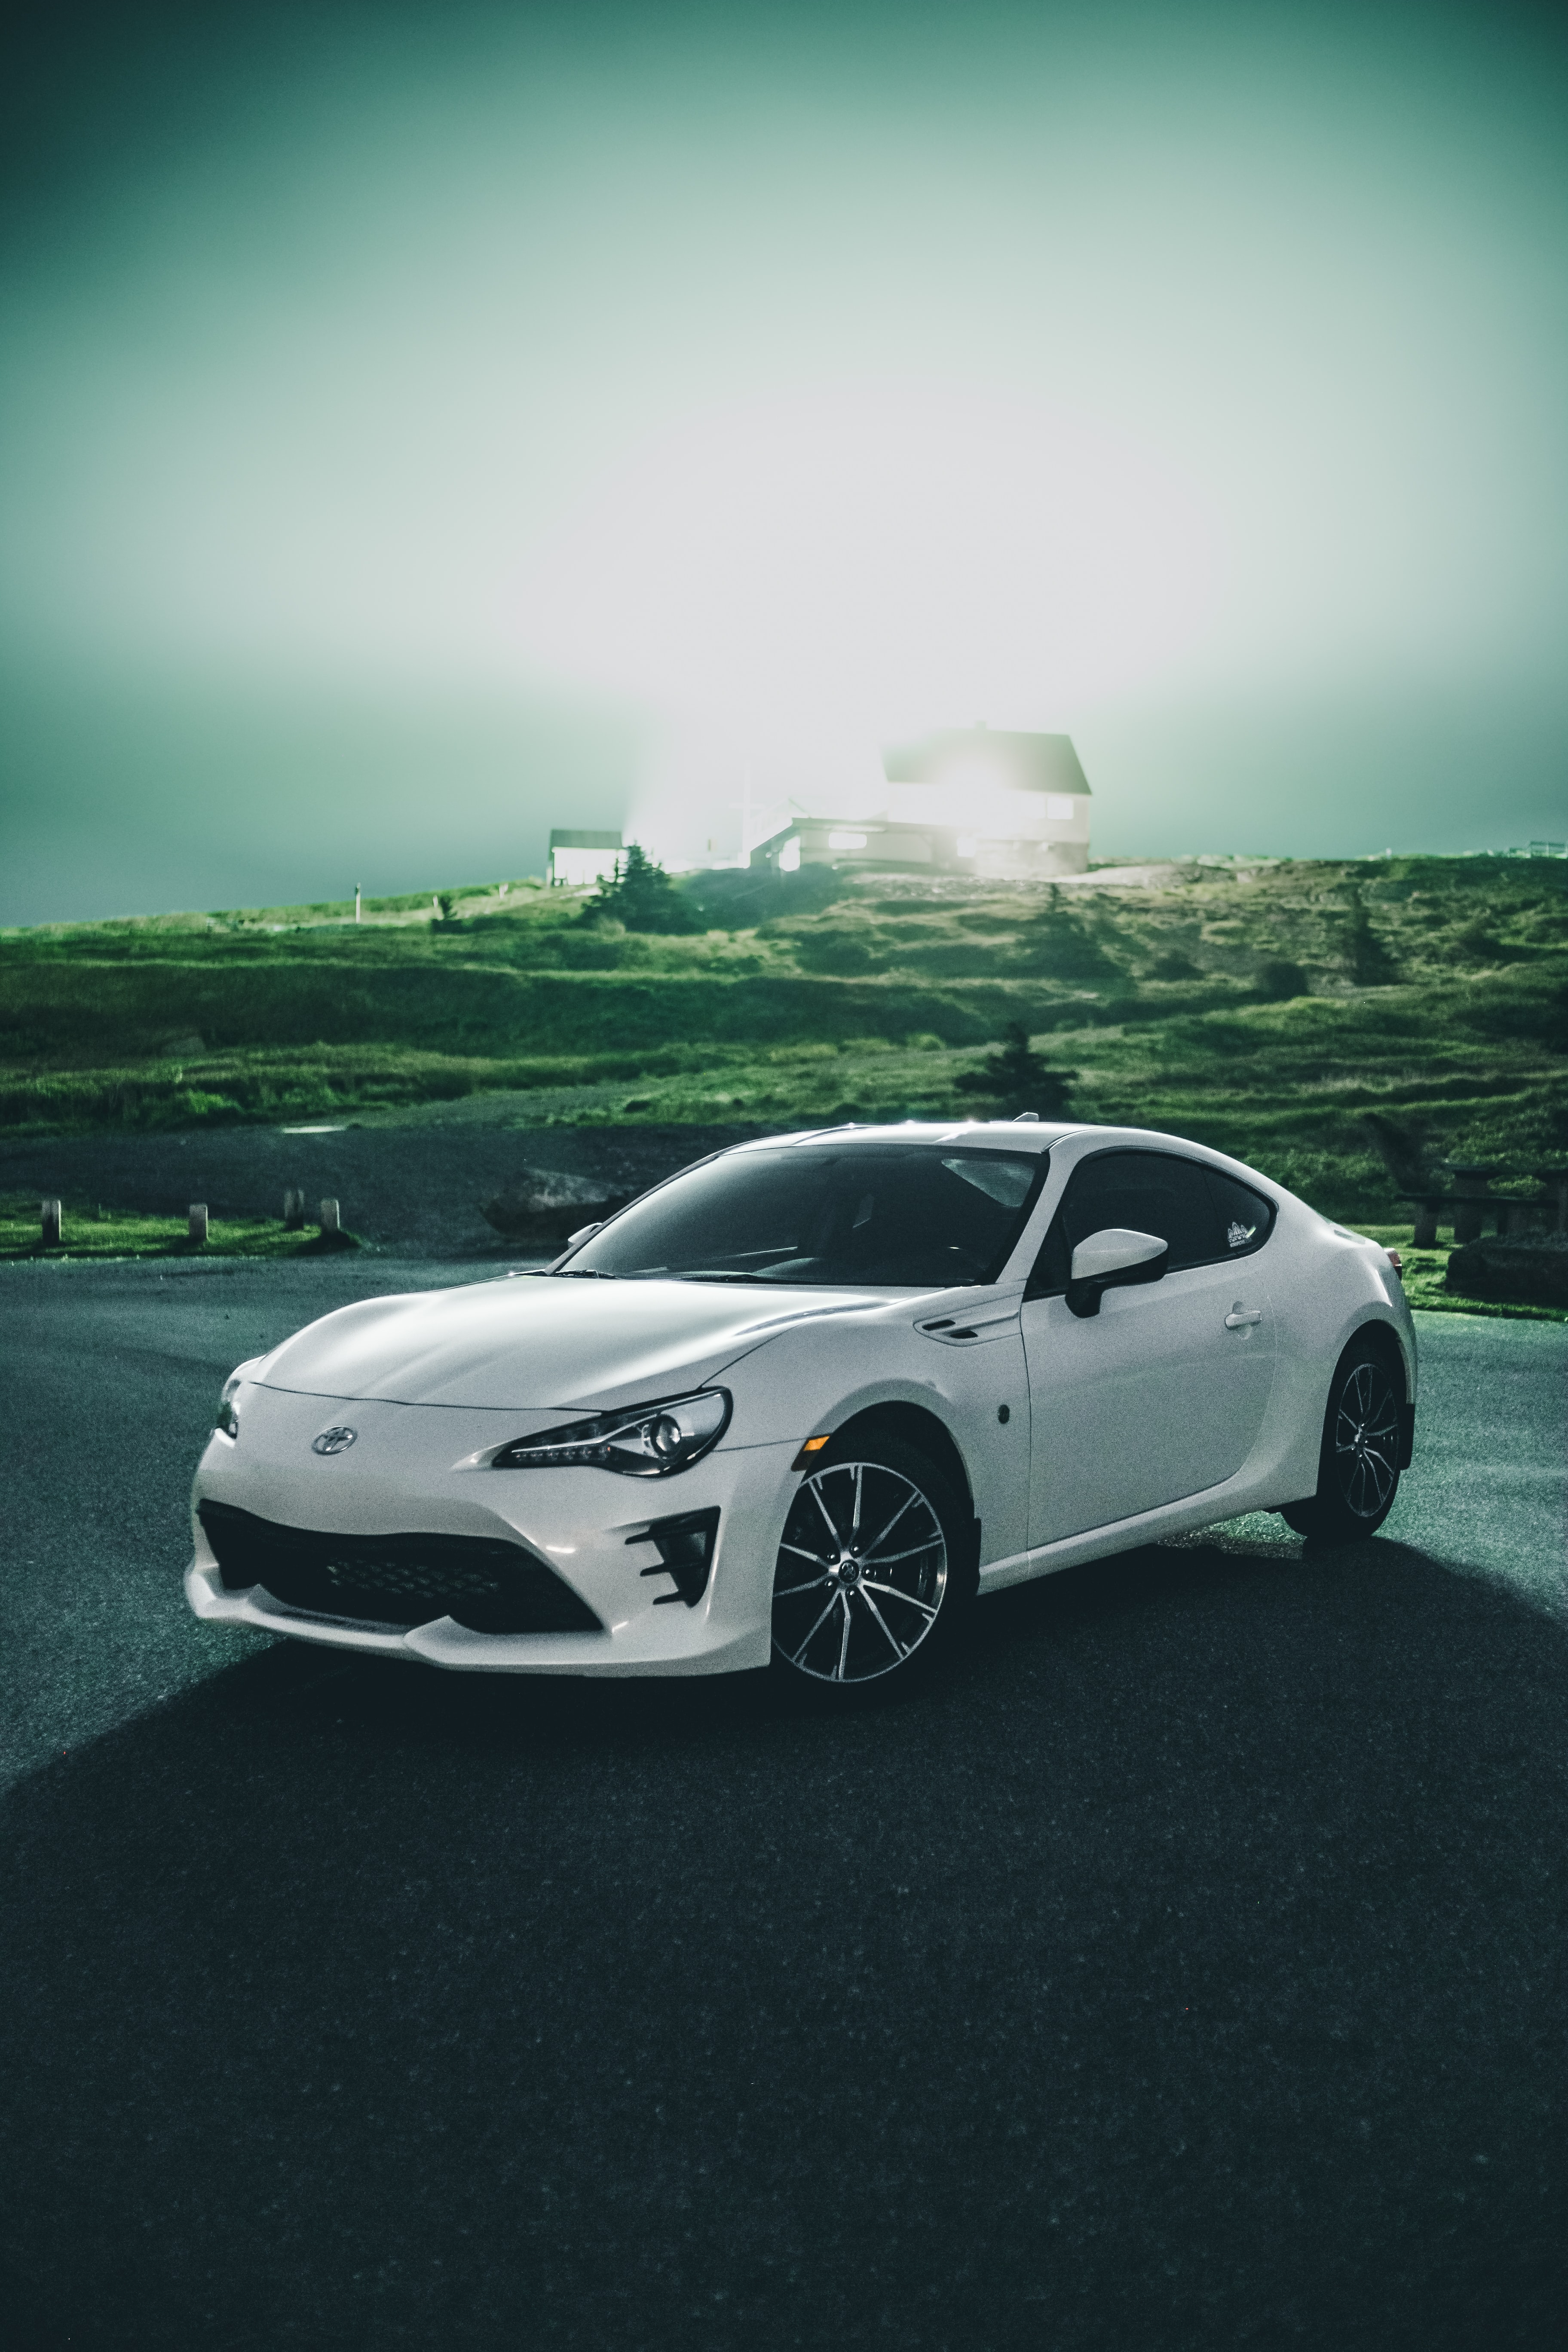 toyota, sports, cars, white, car, sports car, side view